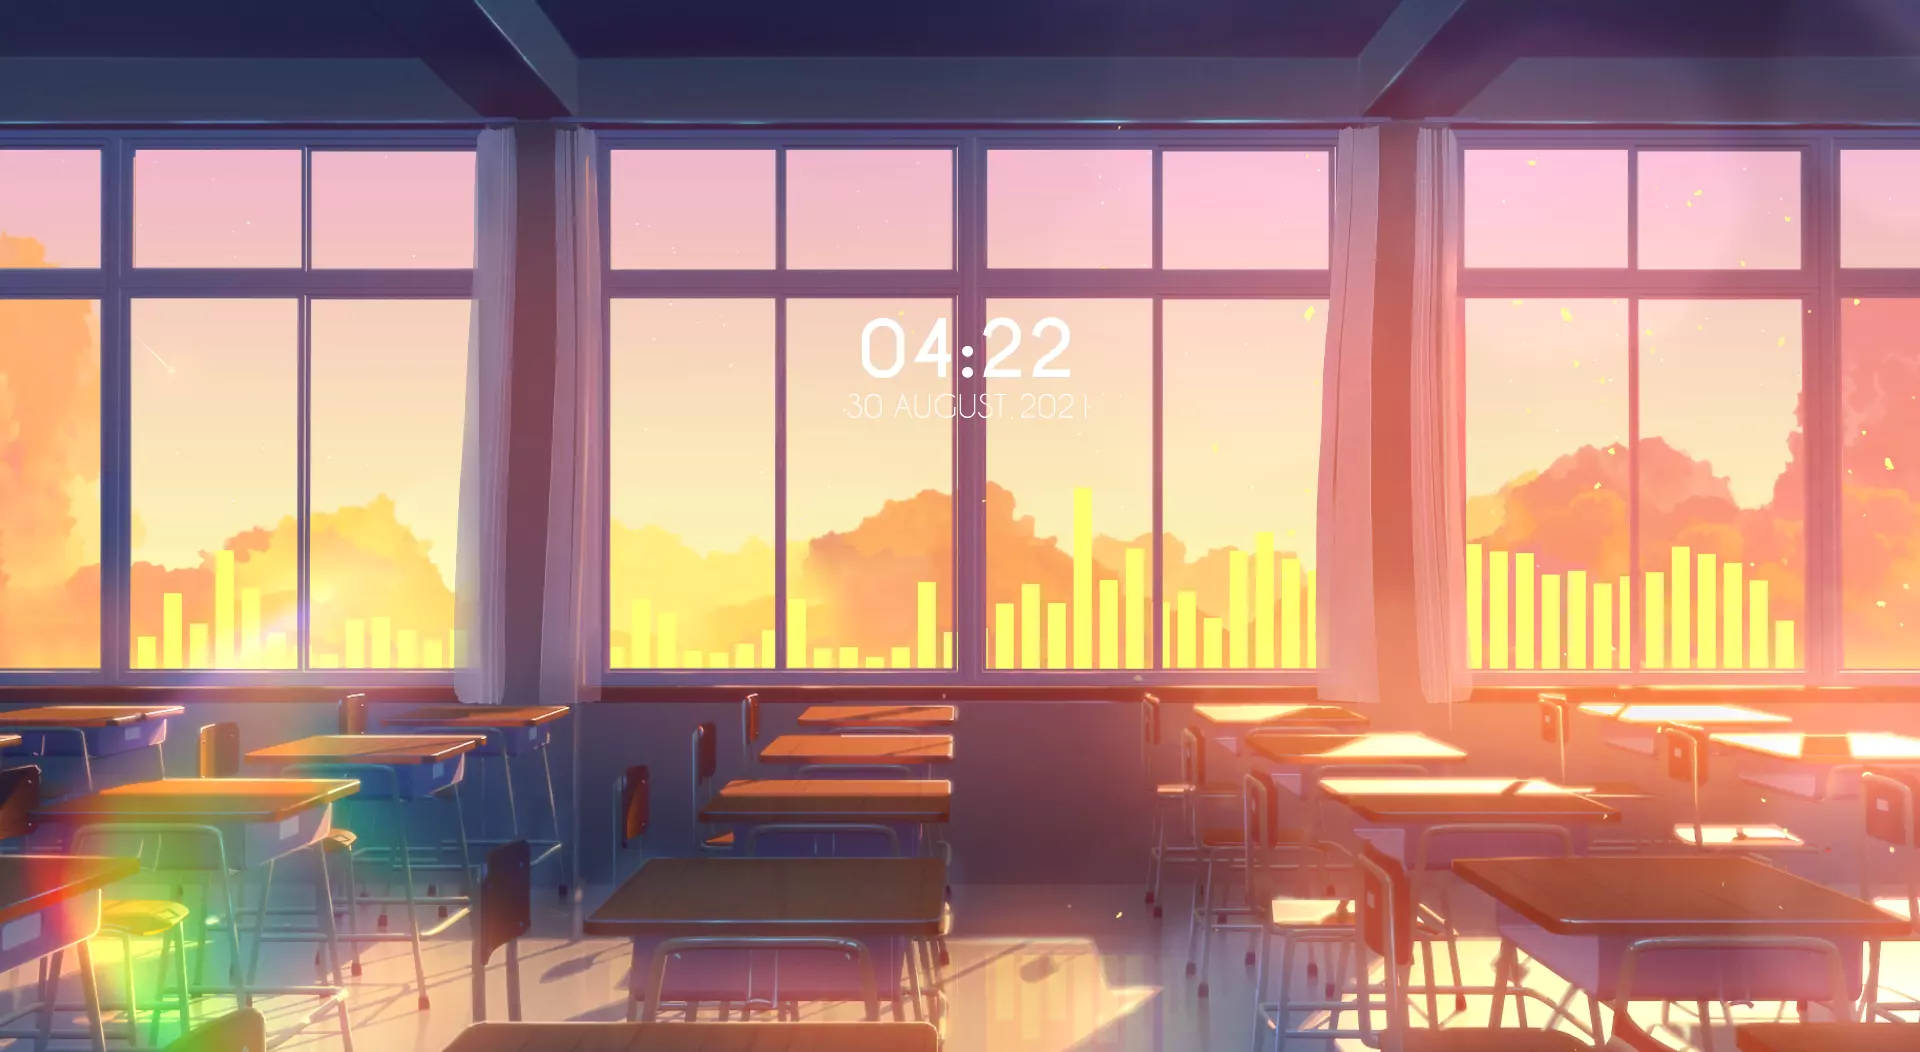 Time On Anime Classroom Wallpaper